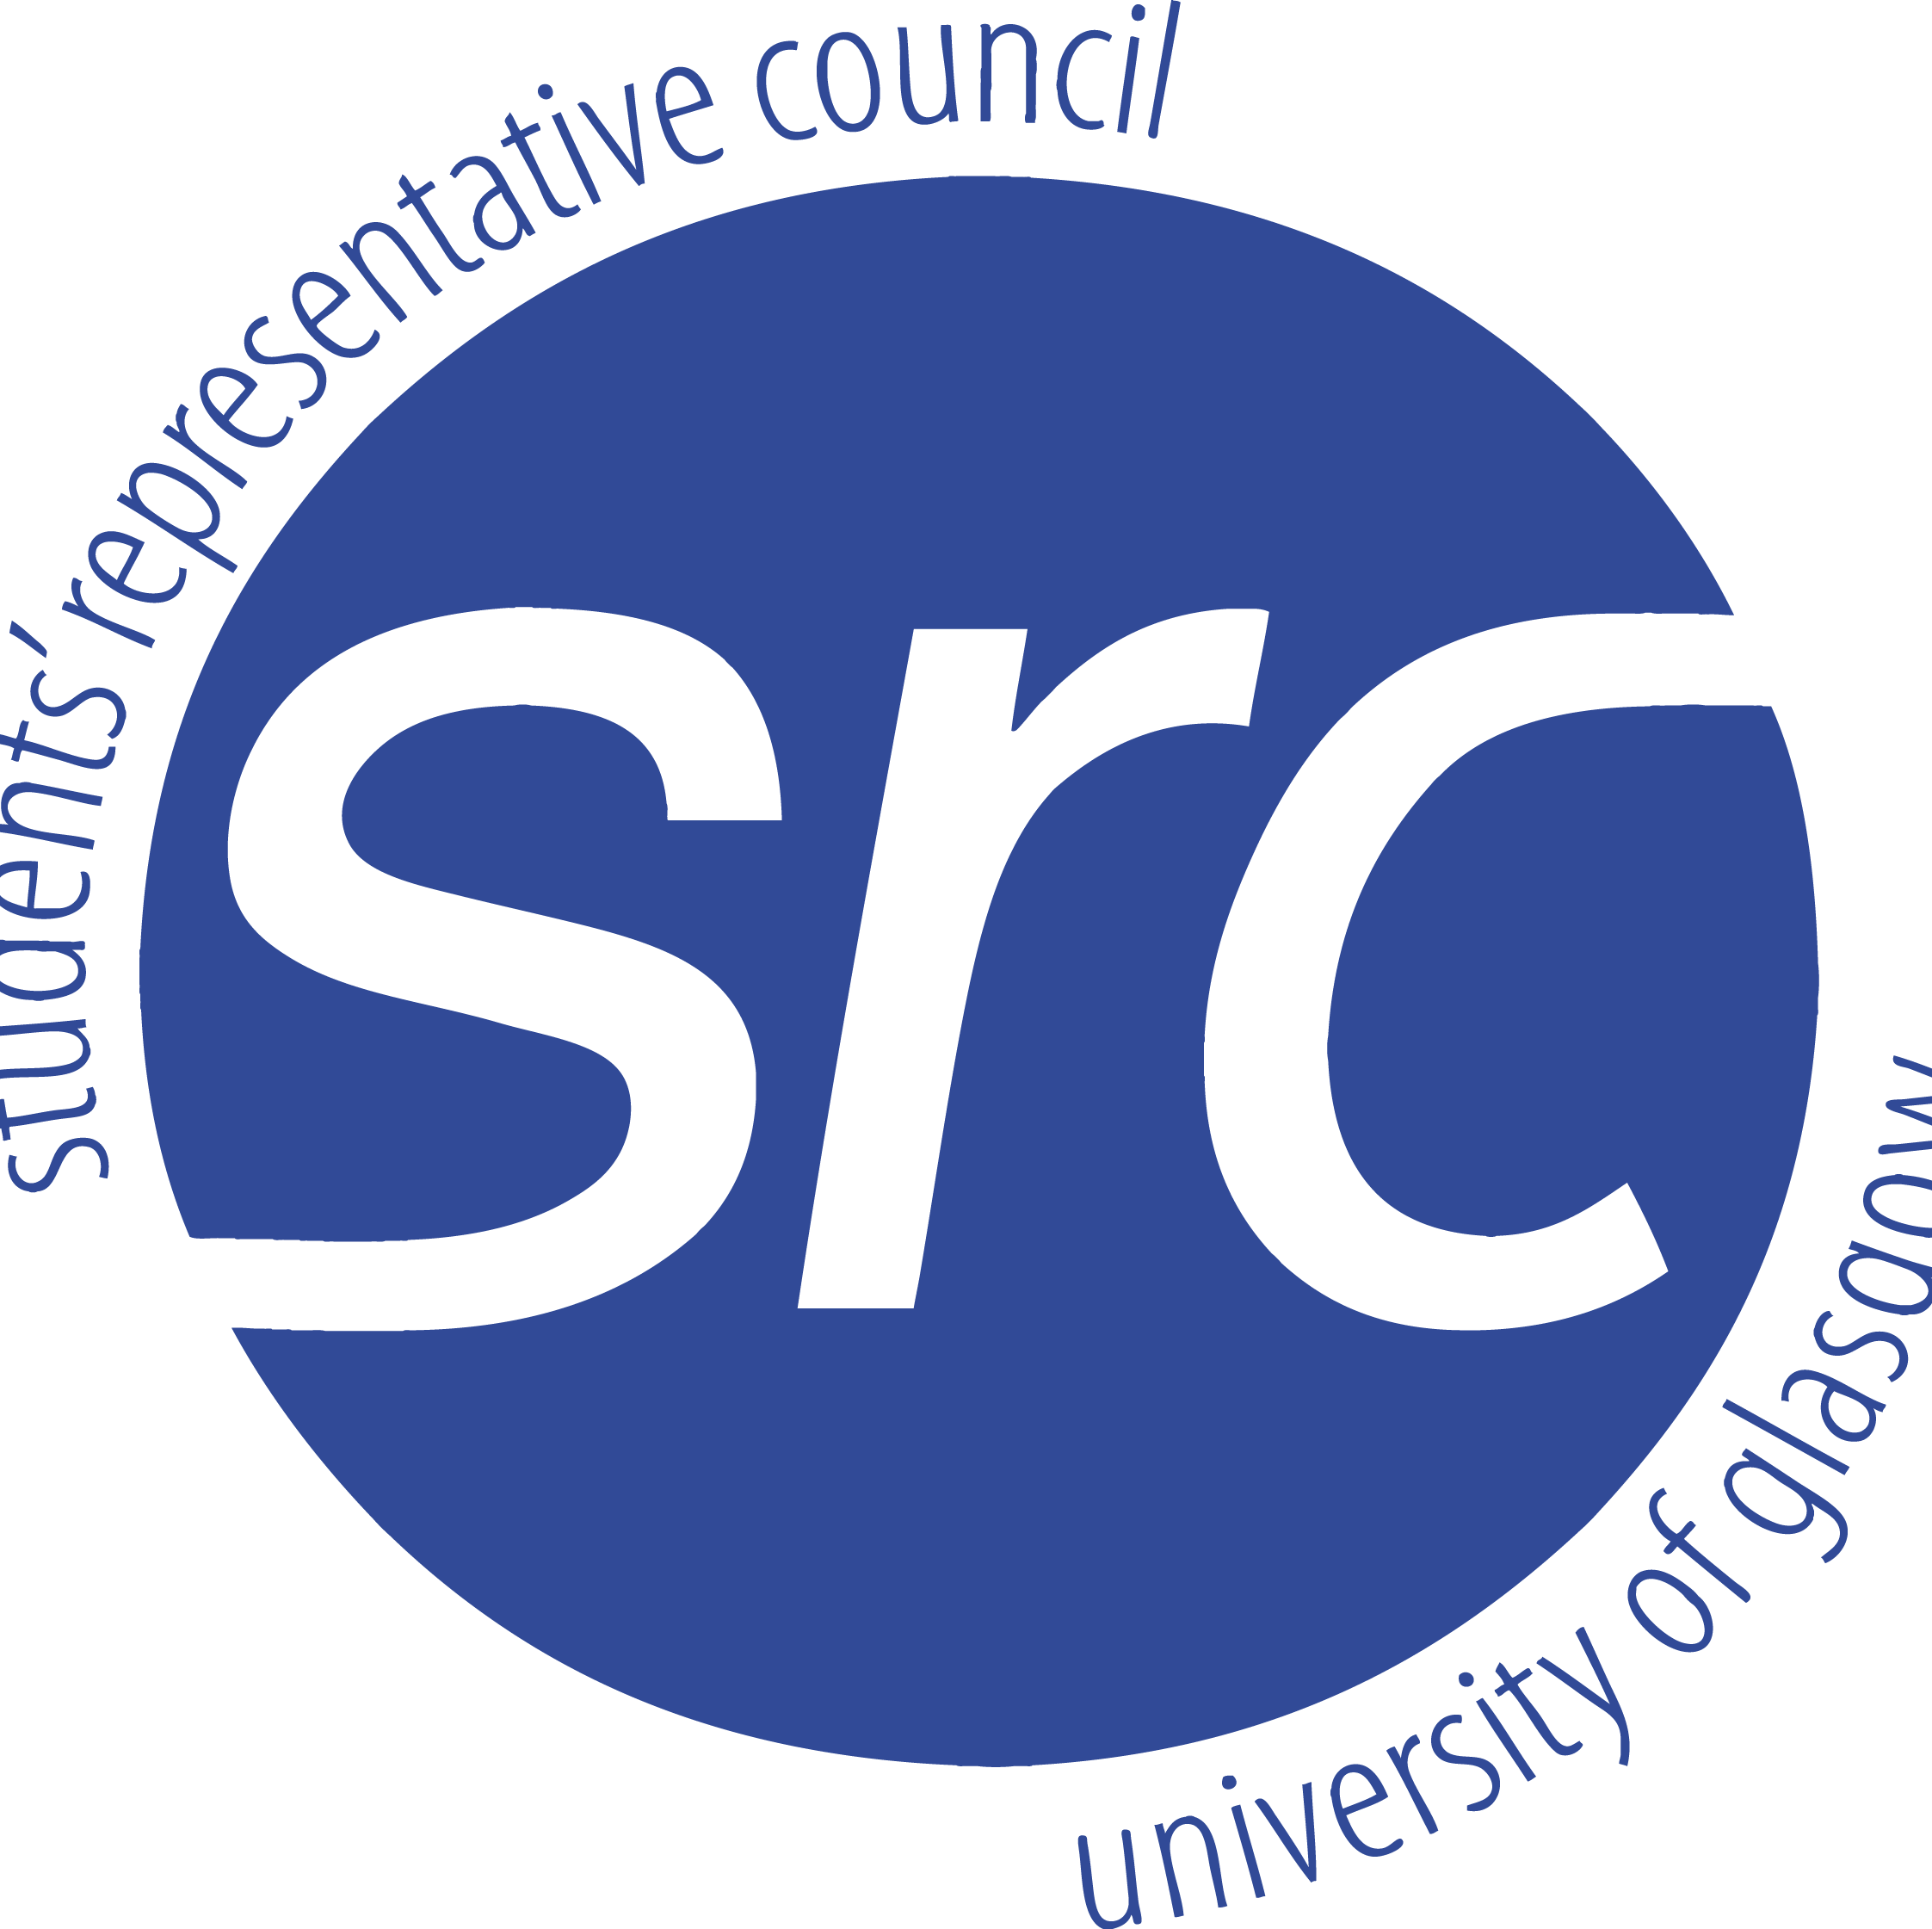 The Glasgow University Student Representative Council logo in blue and white text